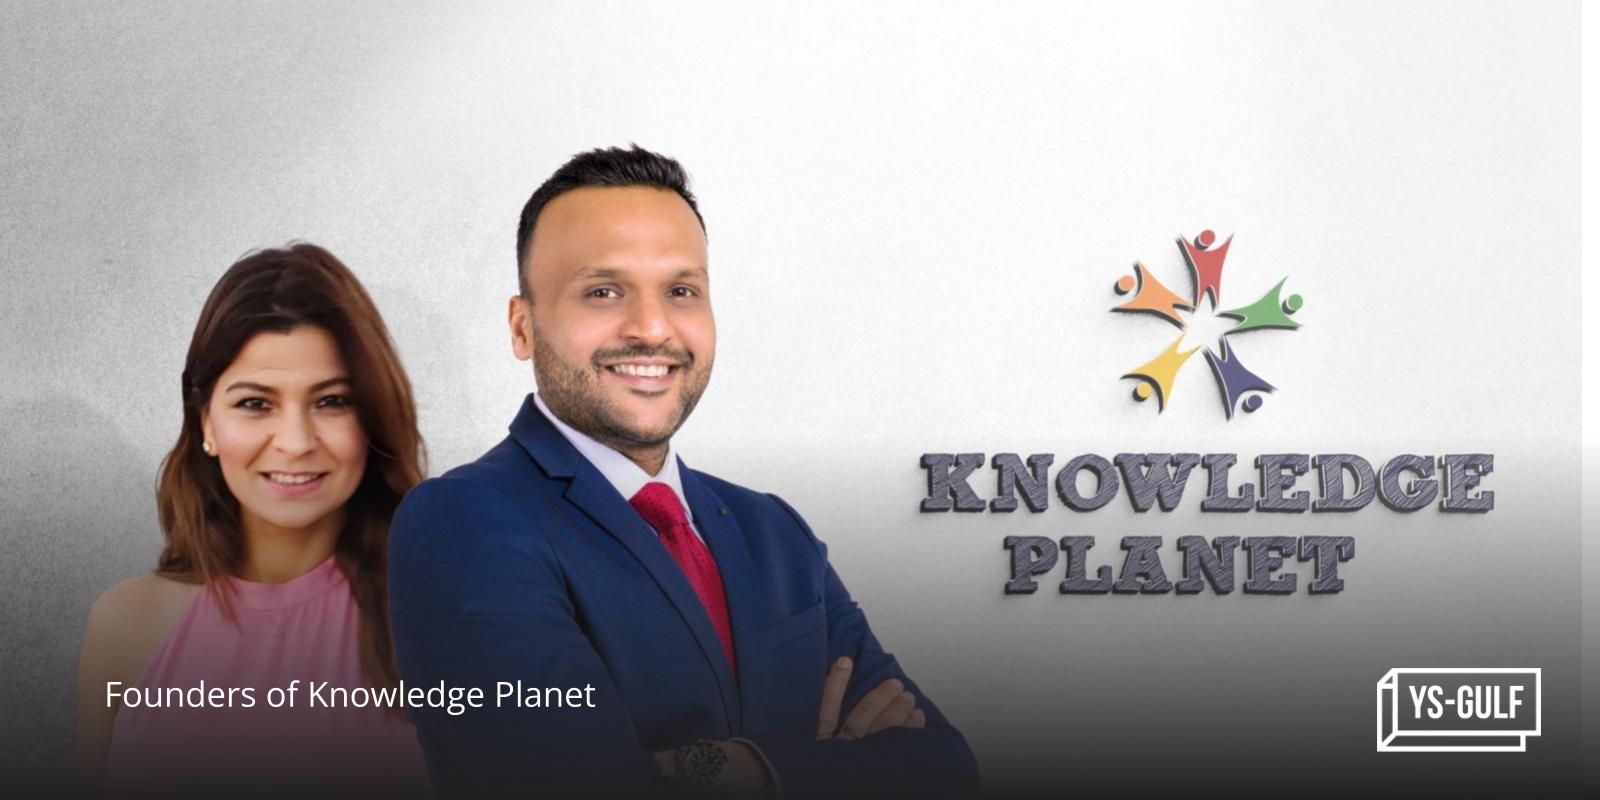 Physics Wallah acquires UAE-based Knowledge Planet, chalks up first international move